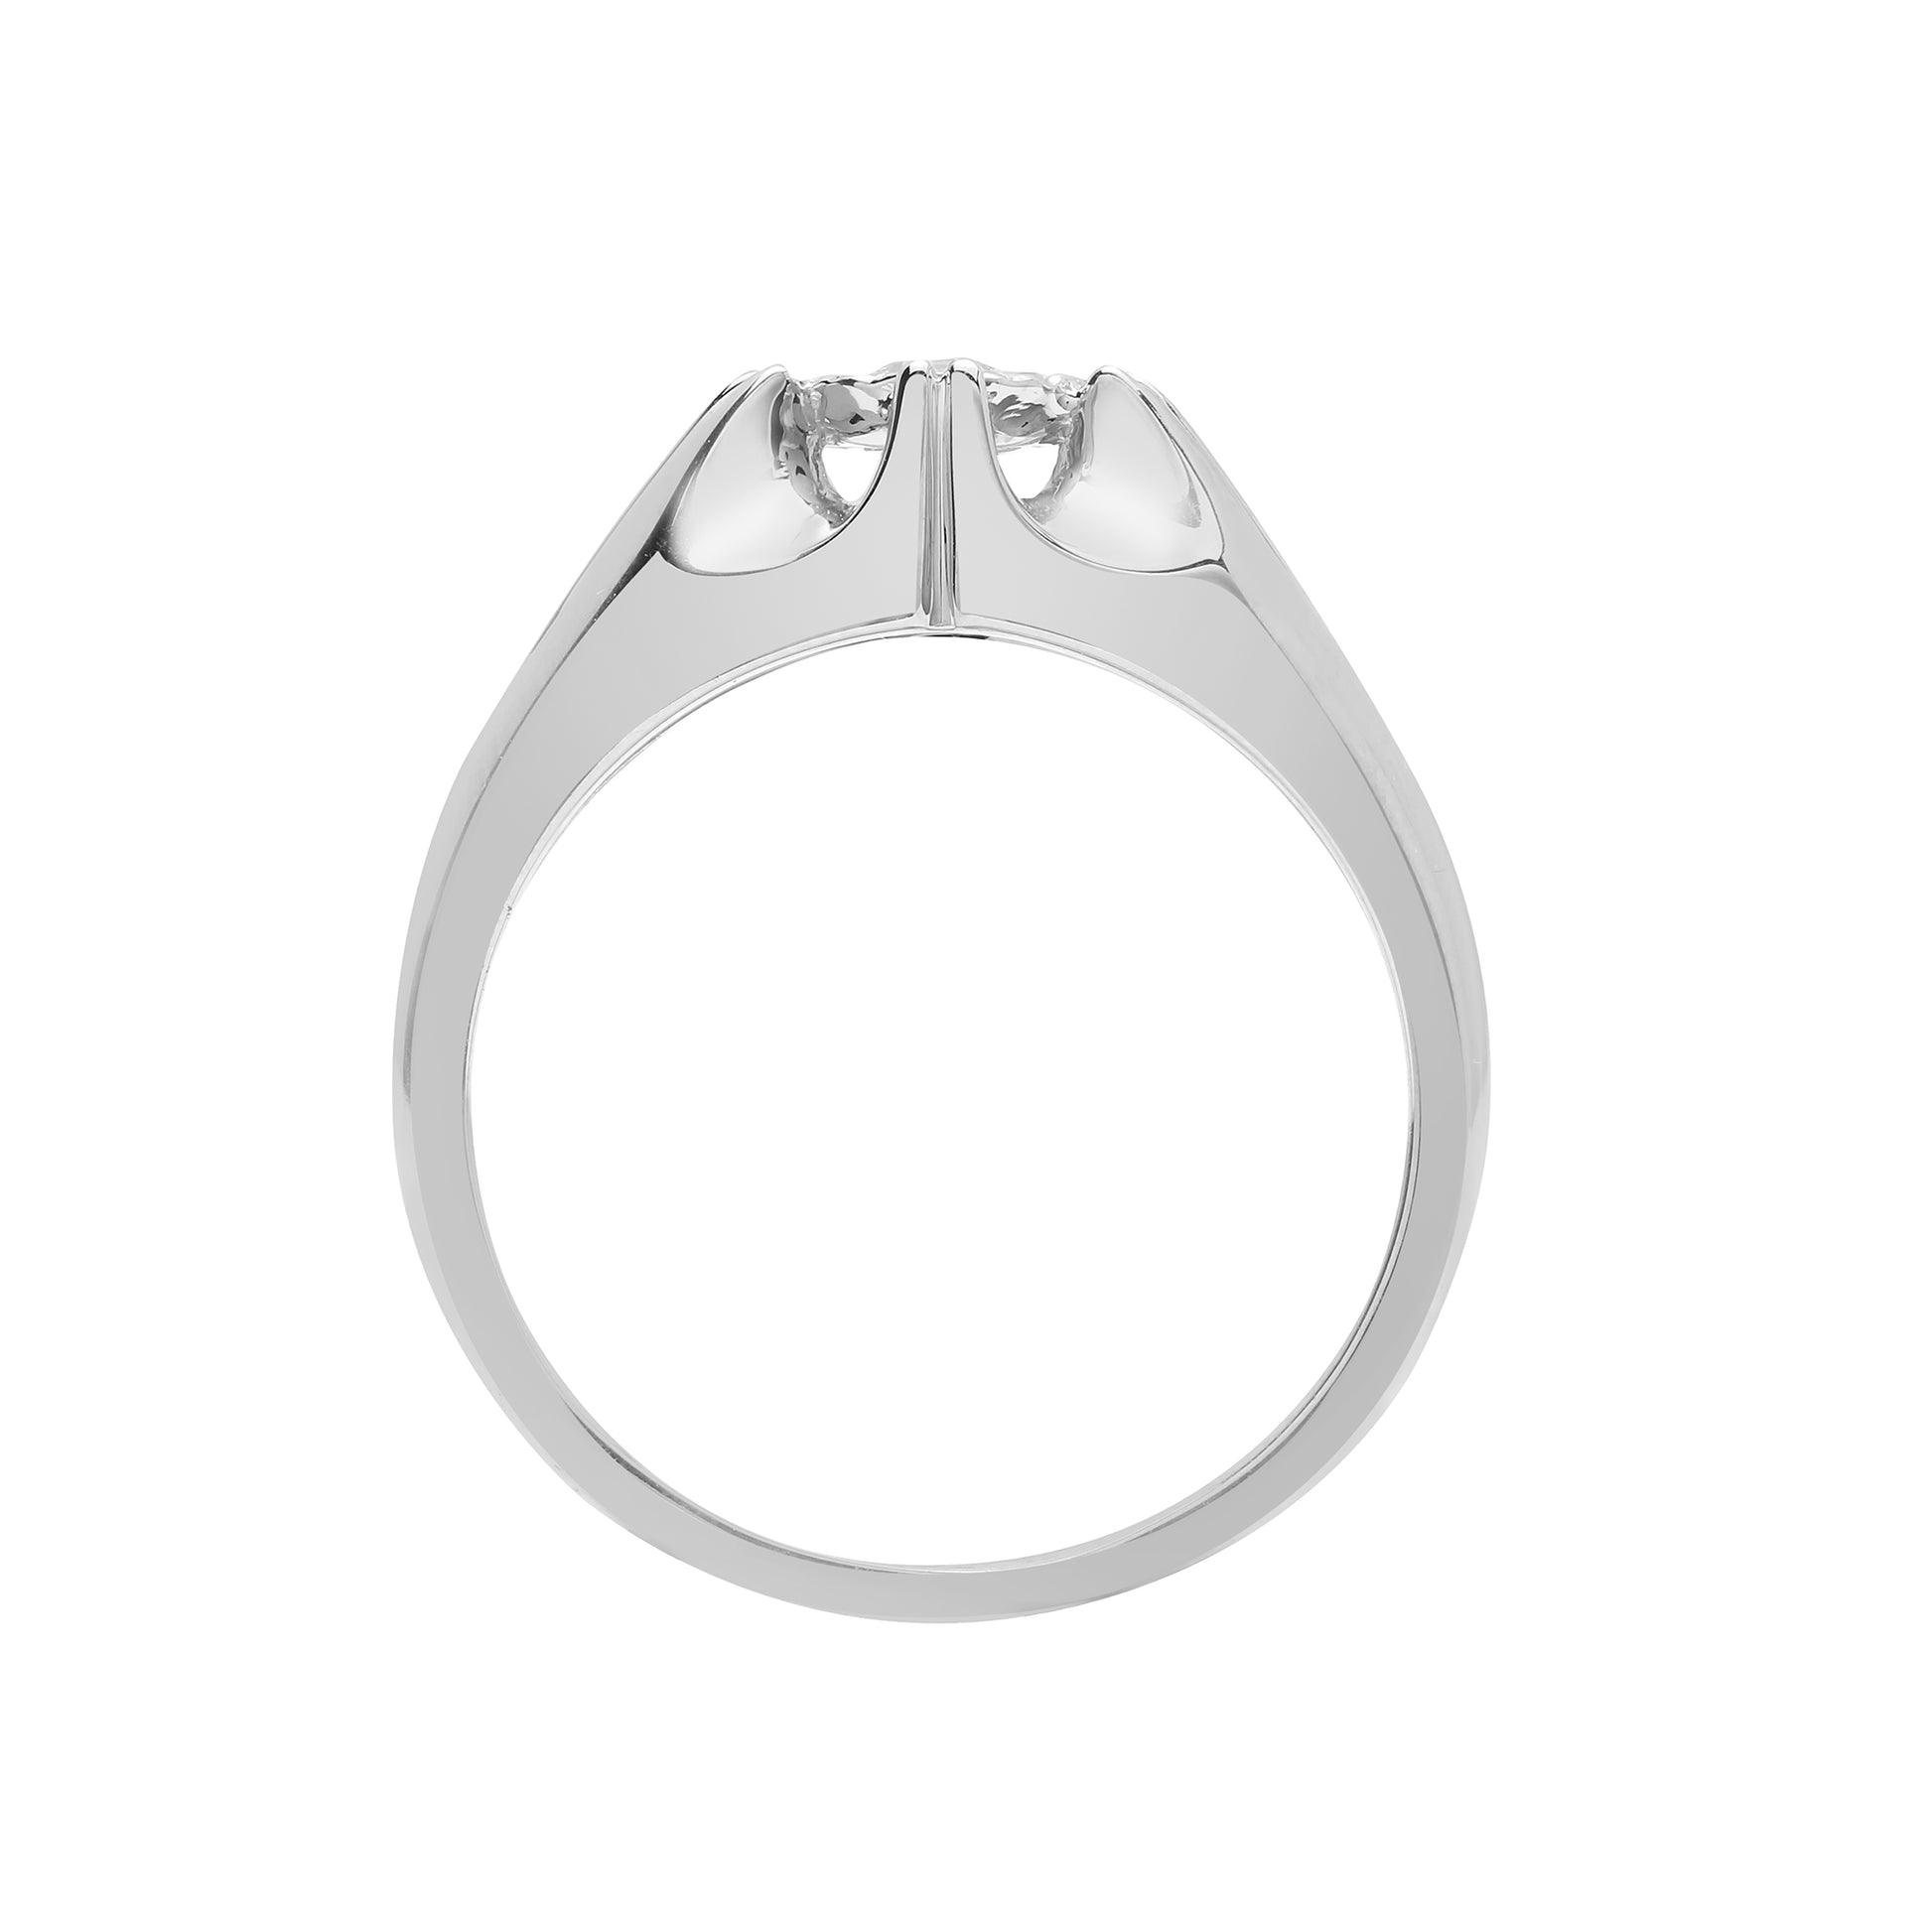 Mens 9ct White Gold  0.2ct Diamond Gypsy Solitaire Ring 9mm - 9R526